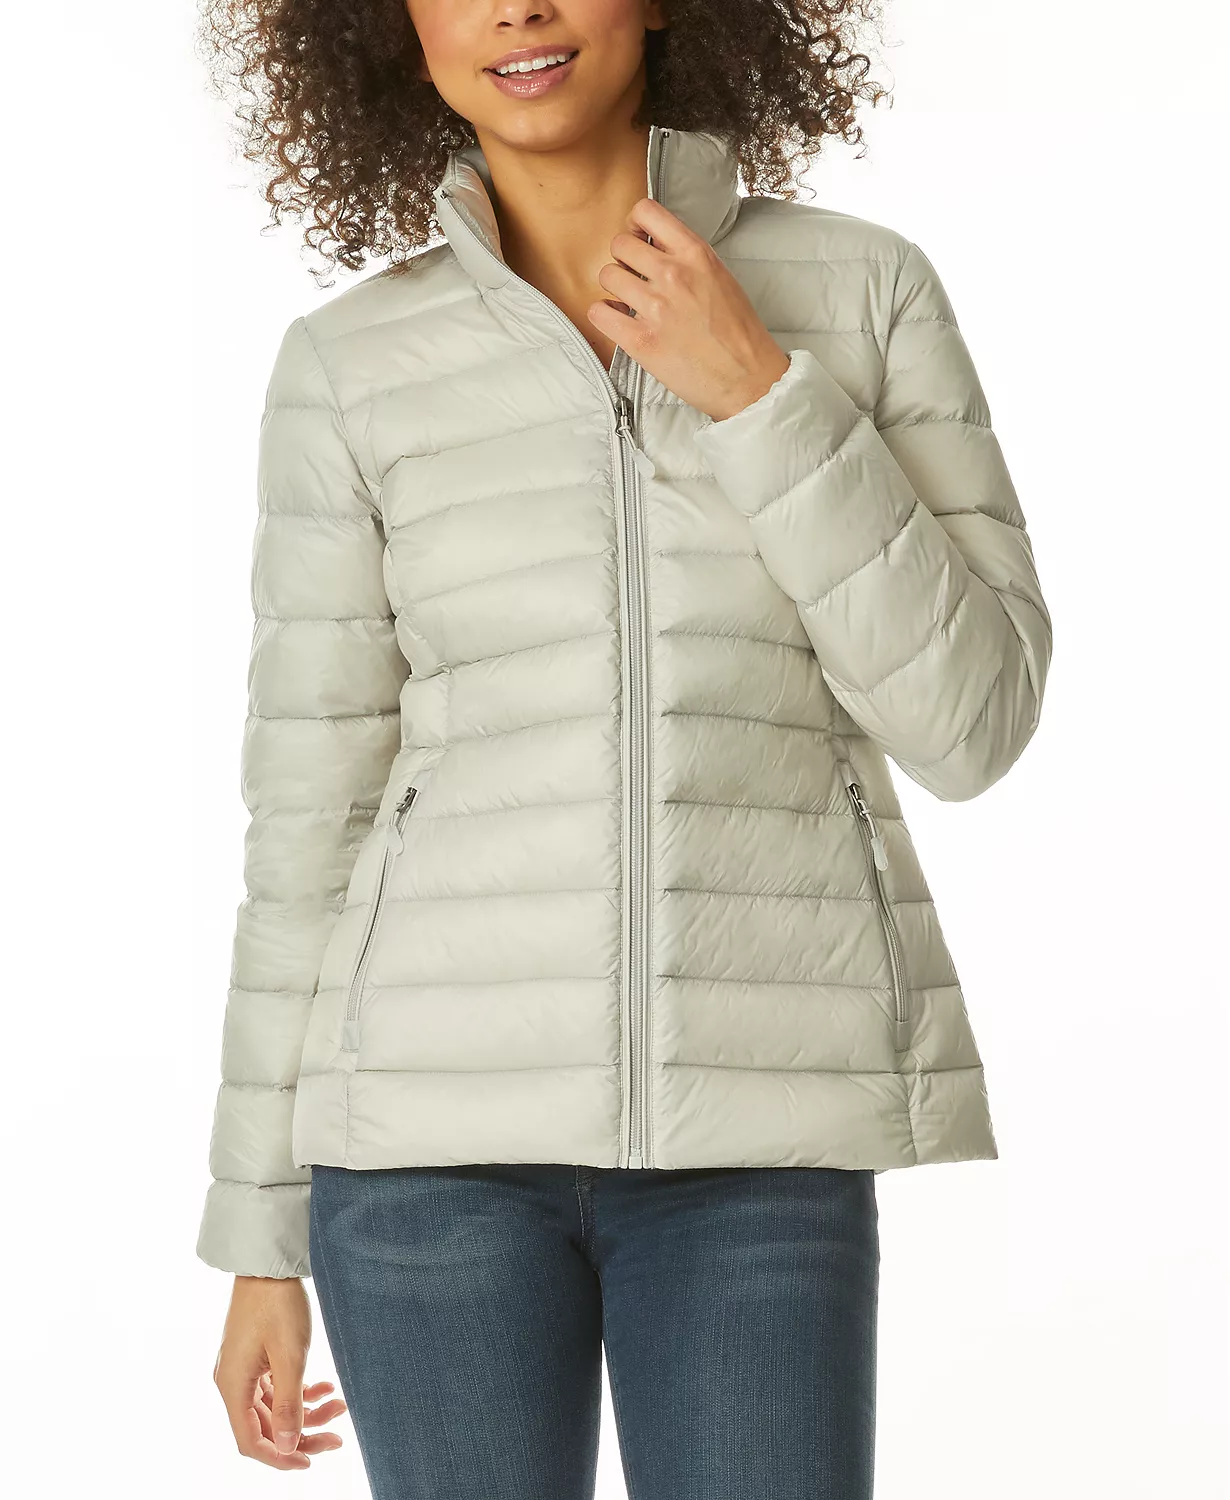 32 Degrees: Packable Down Puffer Coat $27.99